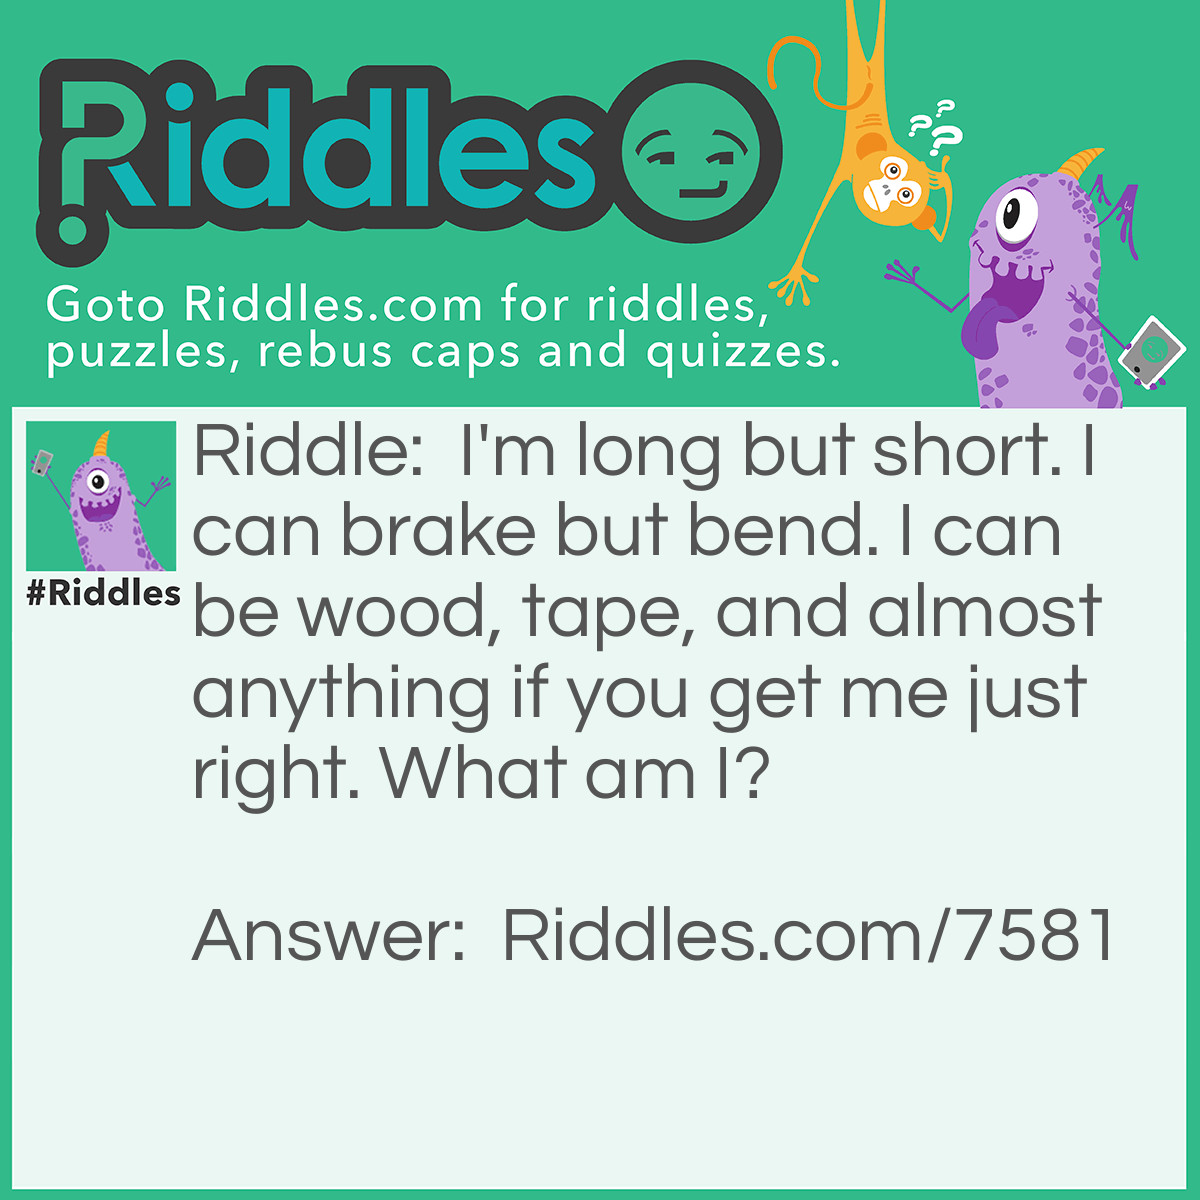 Riddle: I'm long but short. I can brake but bend. I can be wood, tape, and almost anything if you get me just right. What am I? Answer: I'm a ruler.